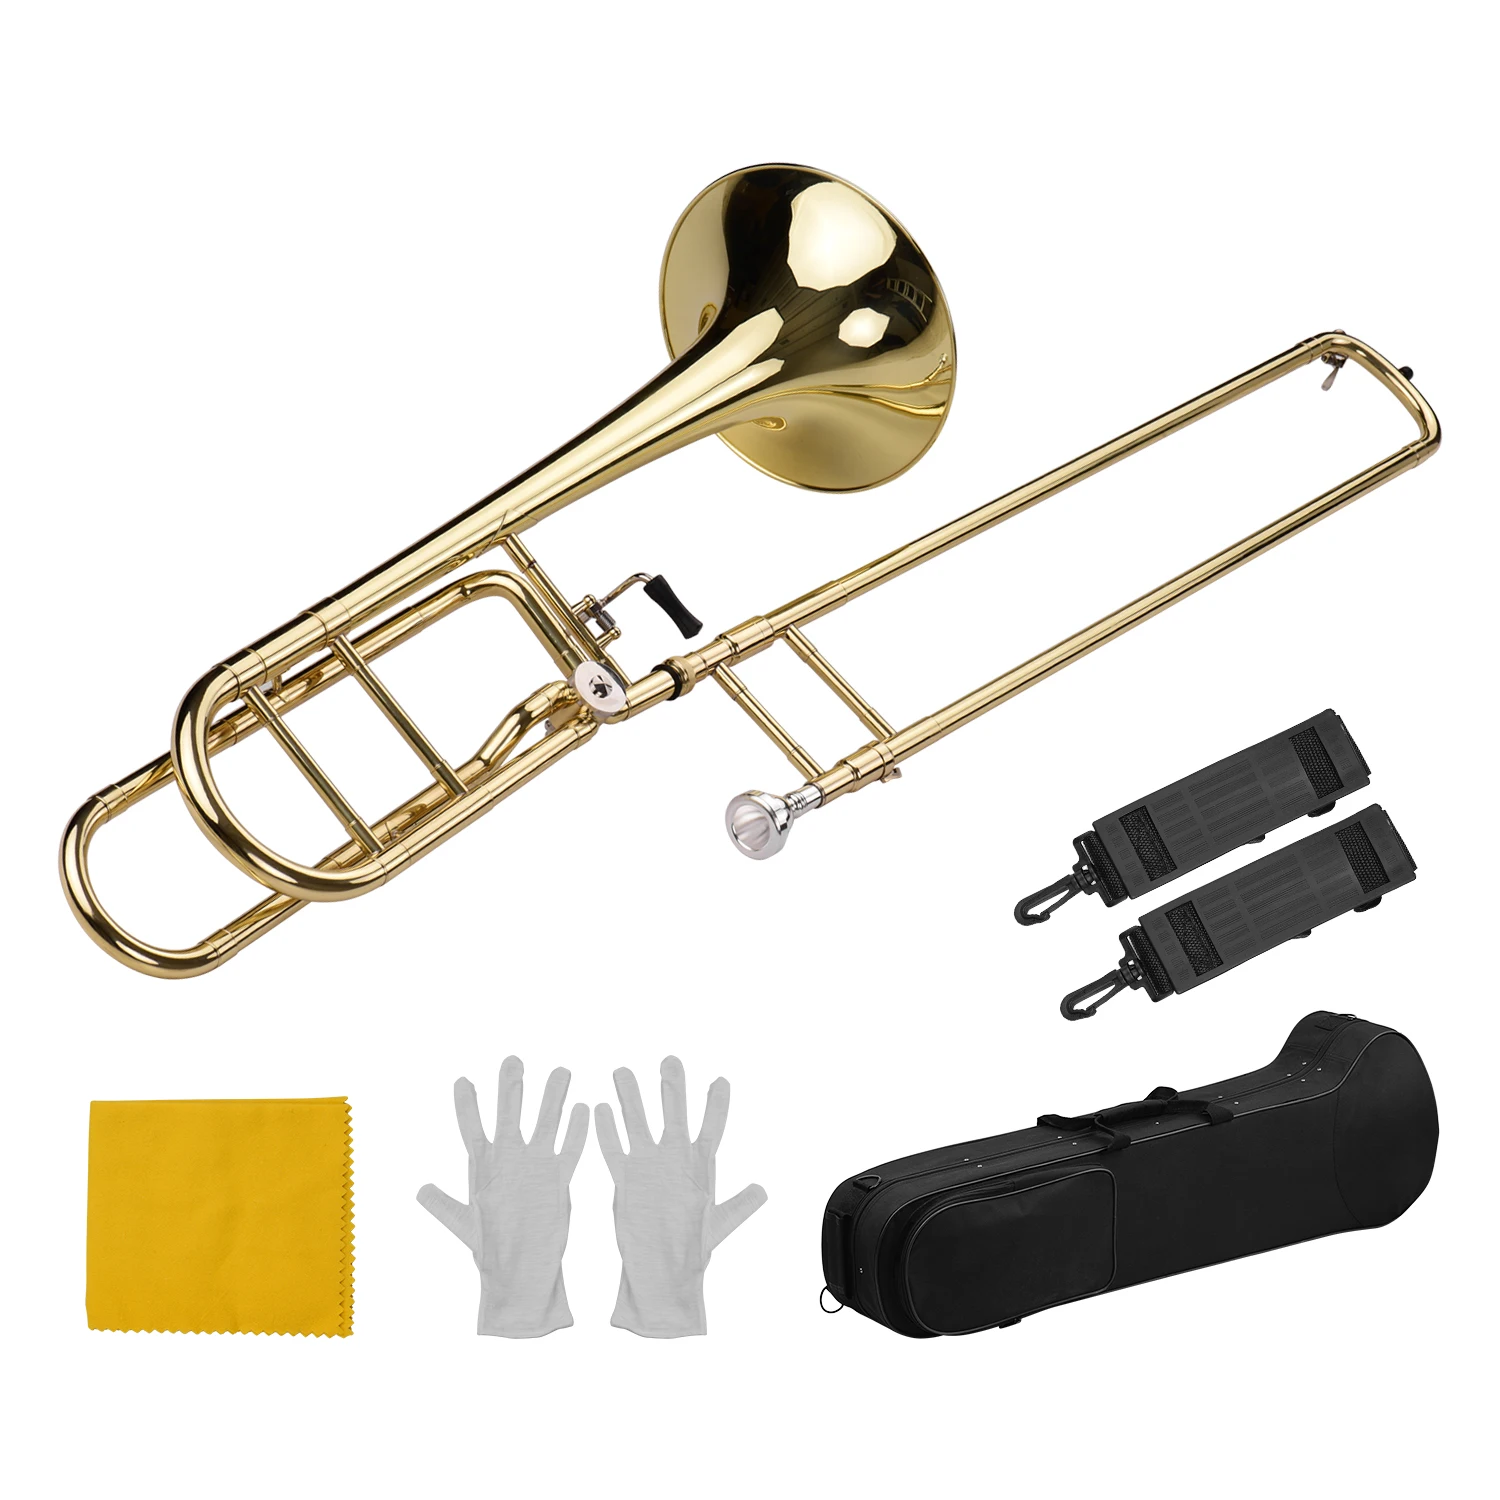 

Muslady Upgraded Intermediate Bb Flat Tenor Slide Trombone with F Trigger Including Mouthpiece Carry Case Gloves Cleaning Cloth